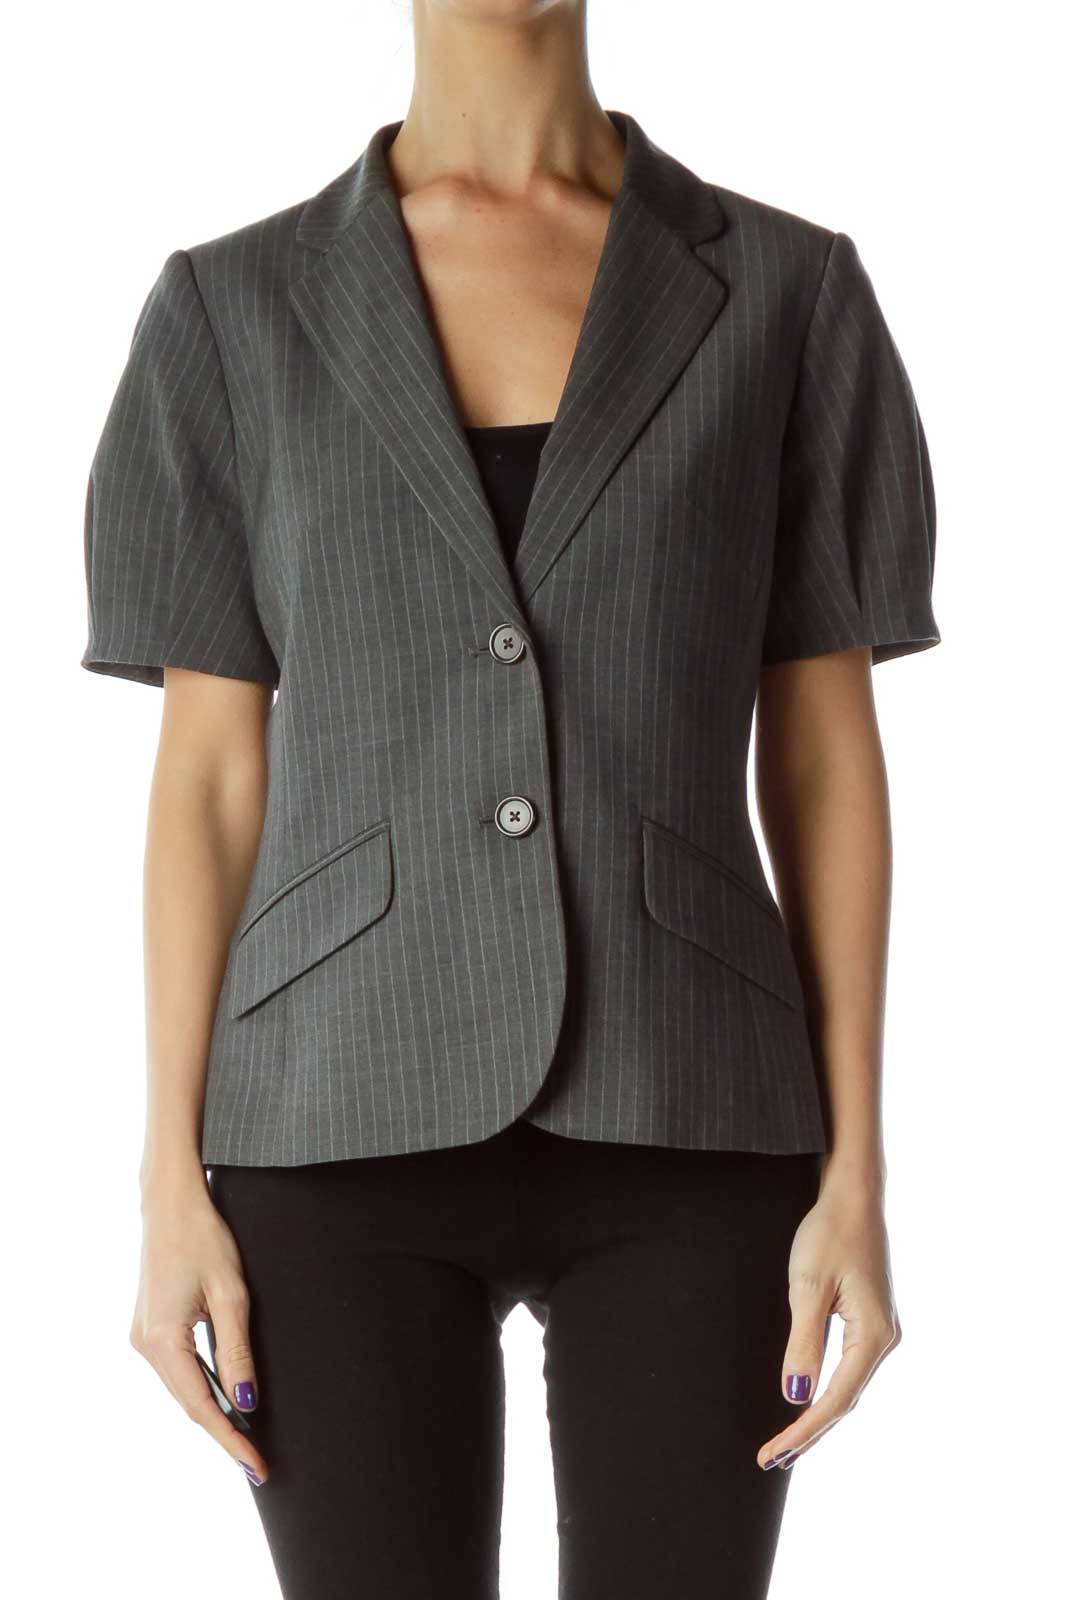 Gray Pinstripe Suit Jacket Front